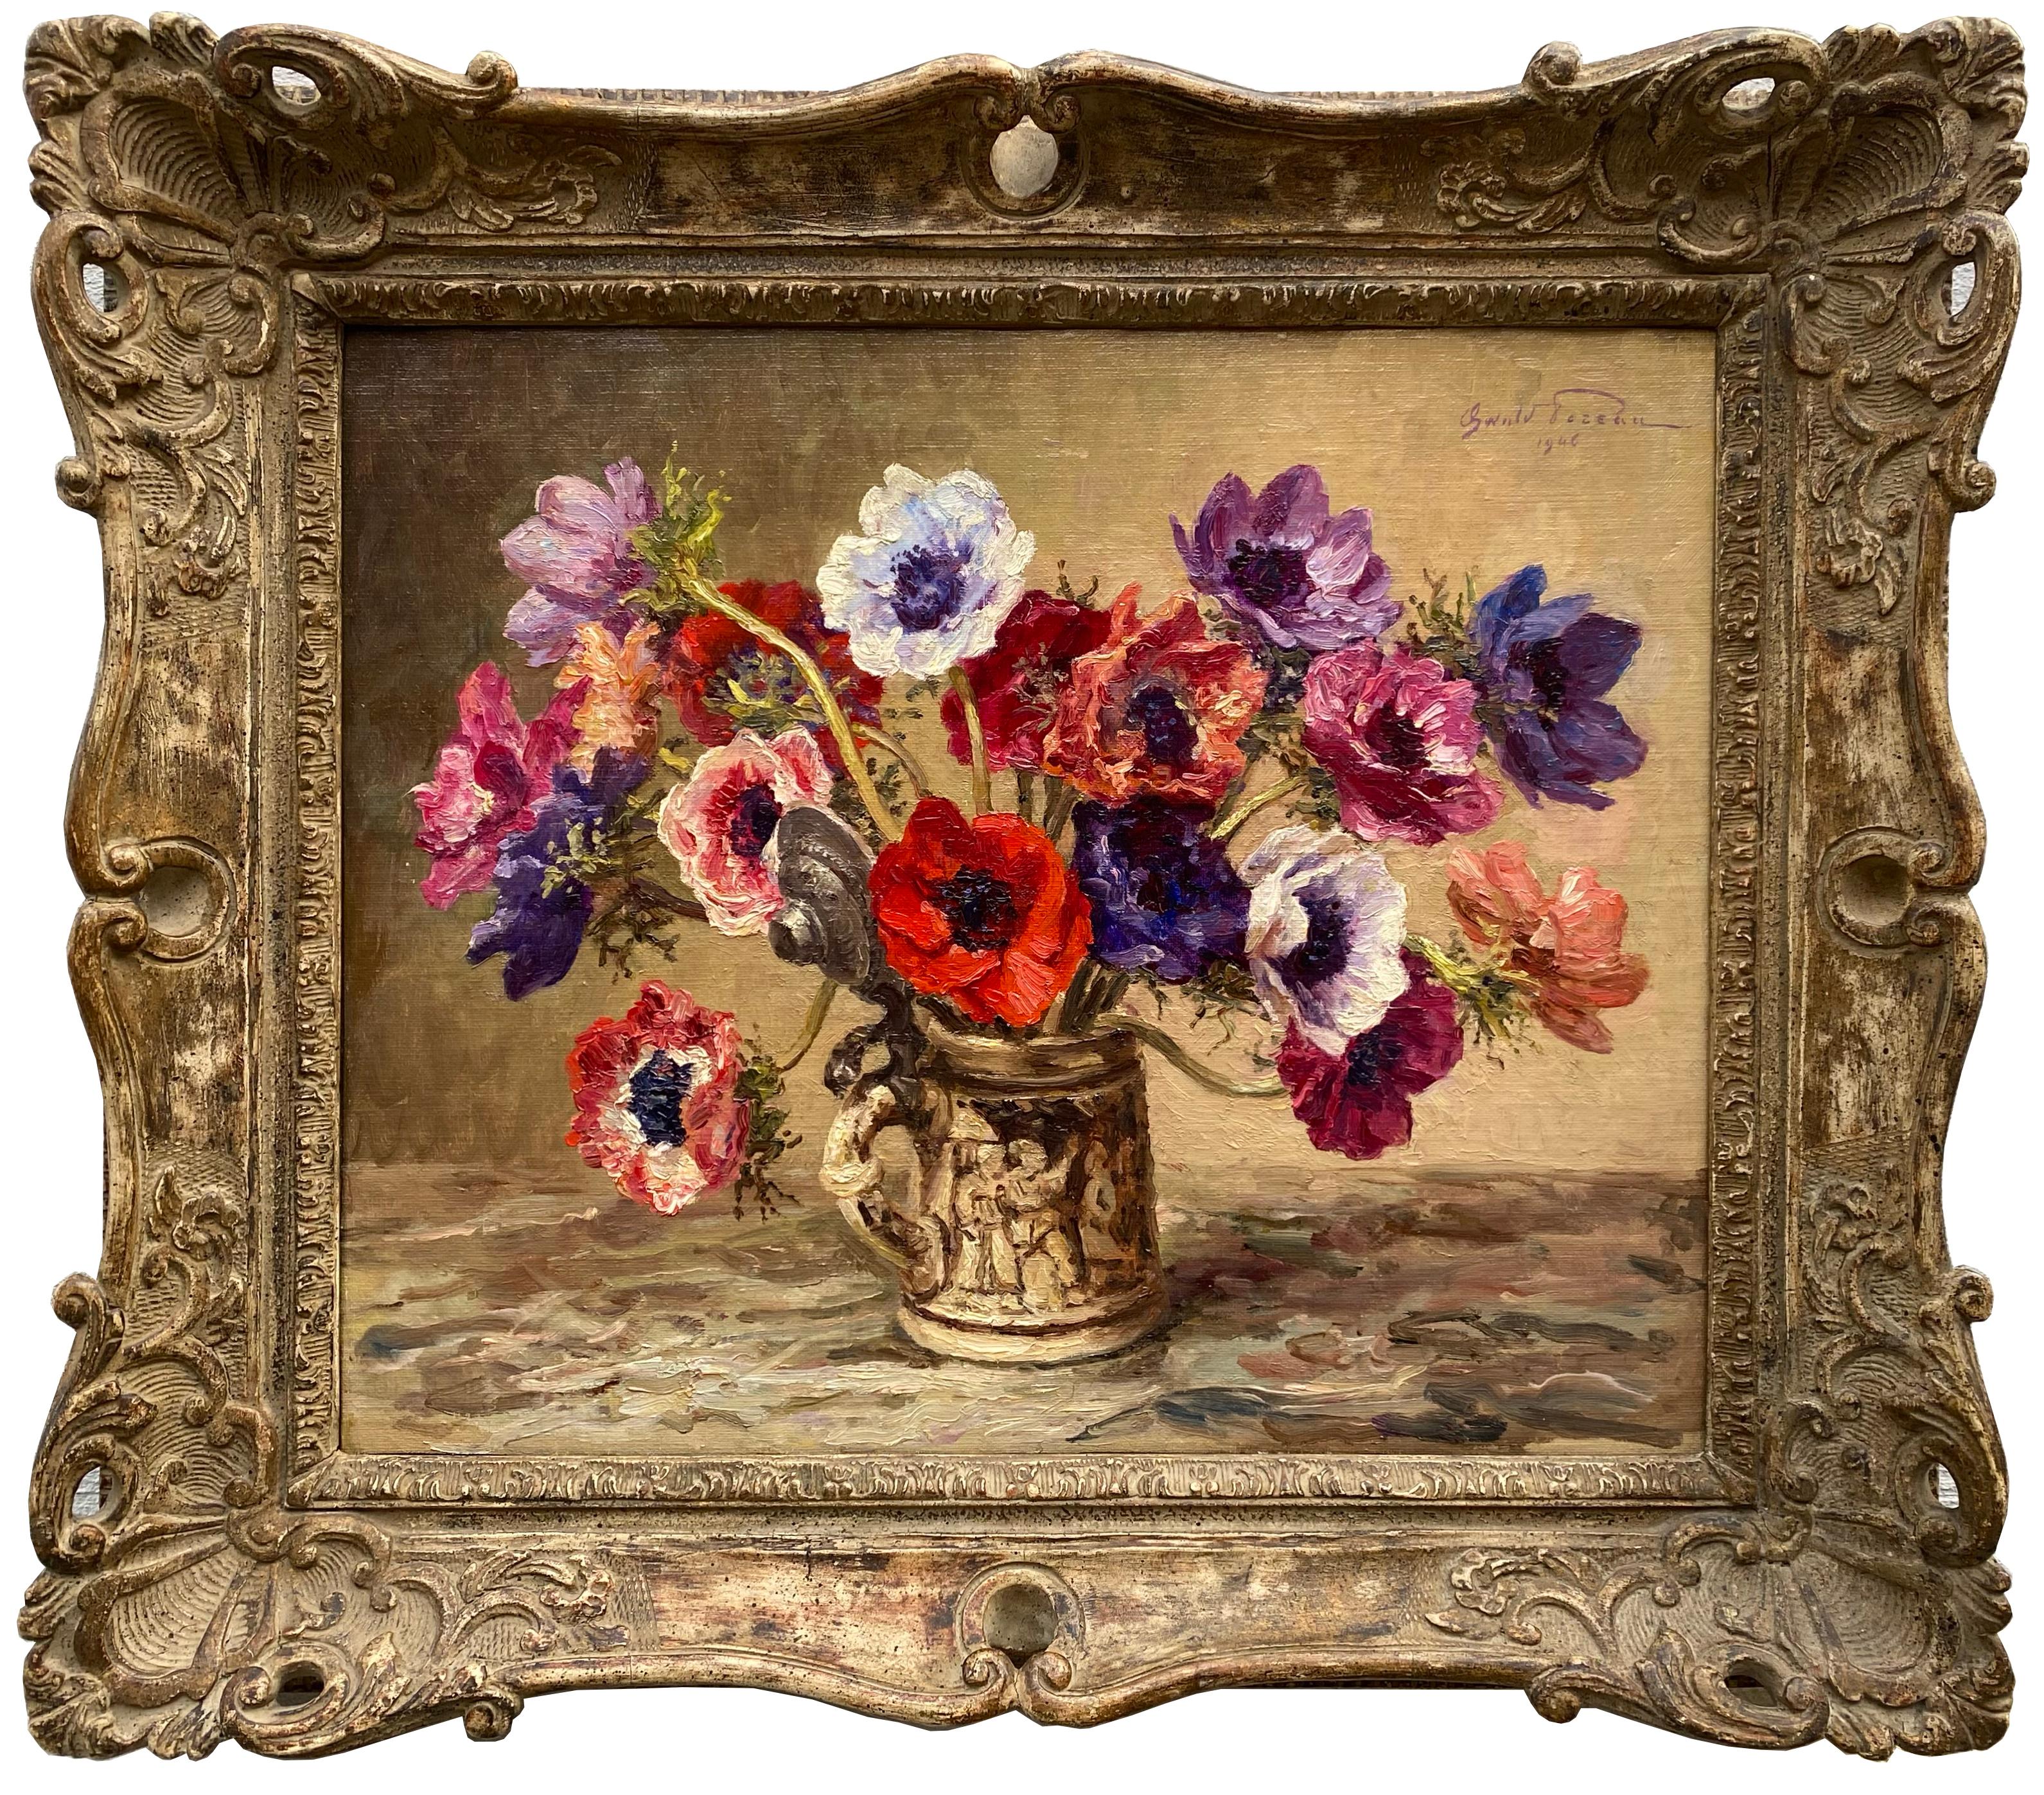 Poreau Oswald
Brussels 1877 –  1955 Waterloo
Belgian Painter

'Anemones'
Signature: Signed top right, dated 1946; on revers signed, named and dated
Medium: Oil on canvas laid down on panel
Dimensions: Image size 39 x 46 cm, frame size 54 x 62